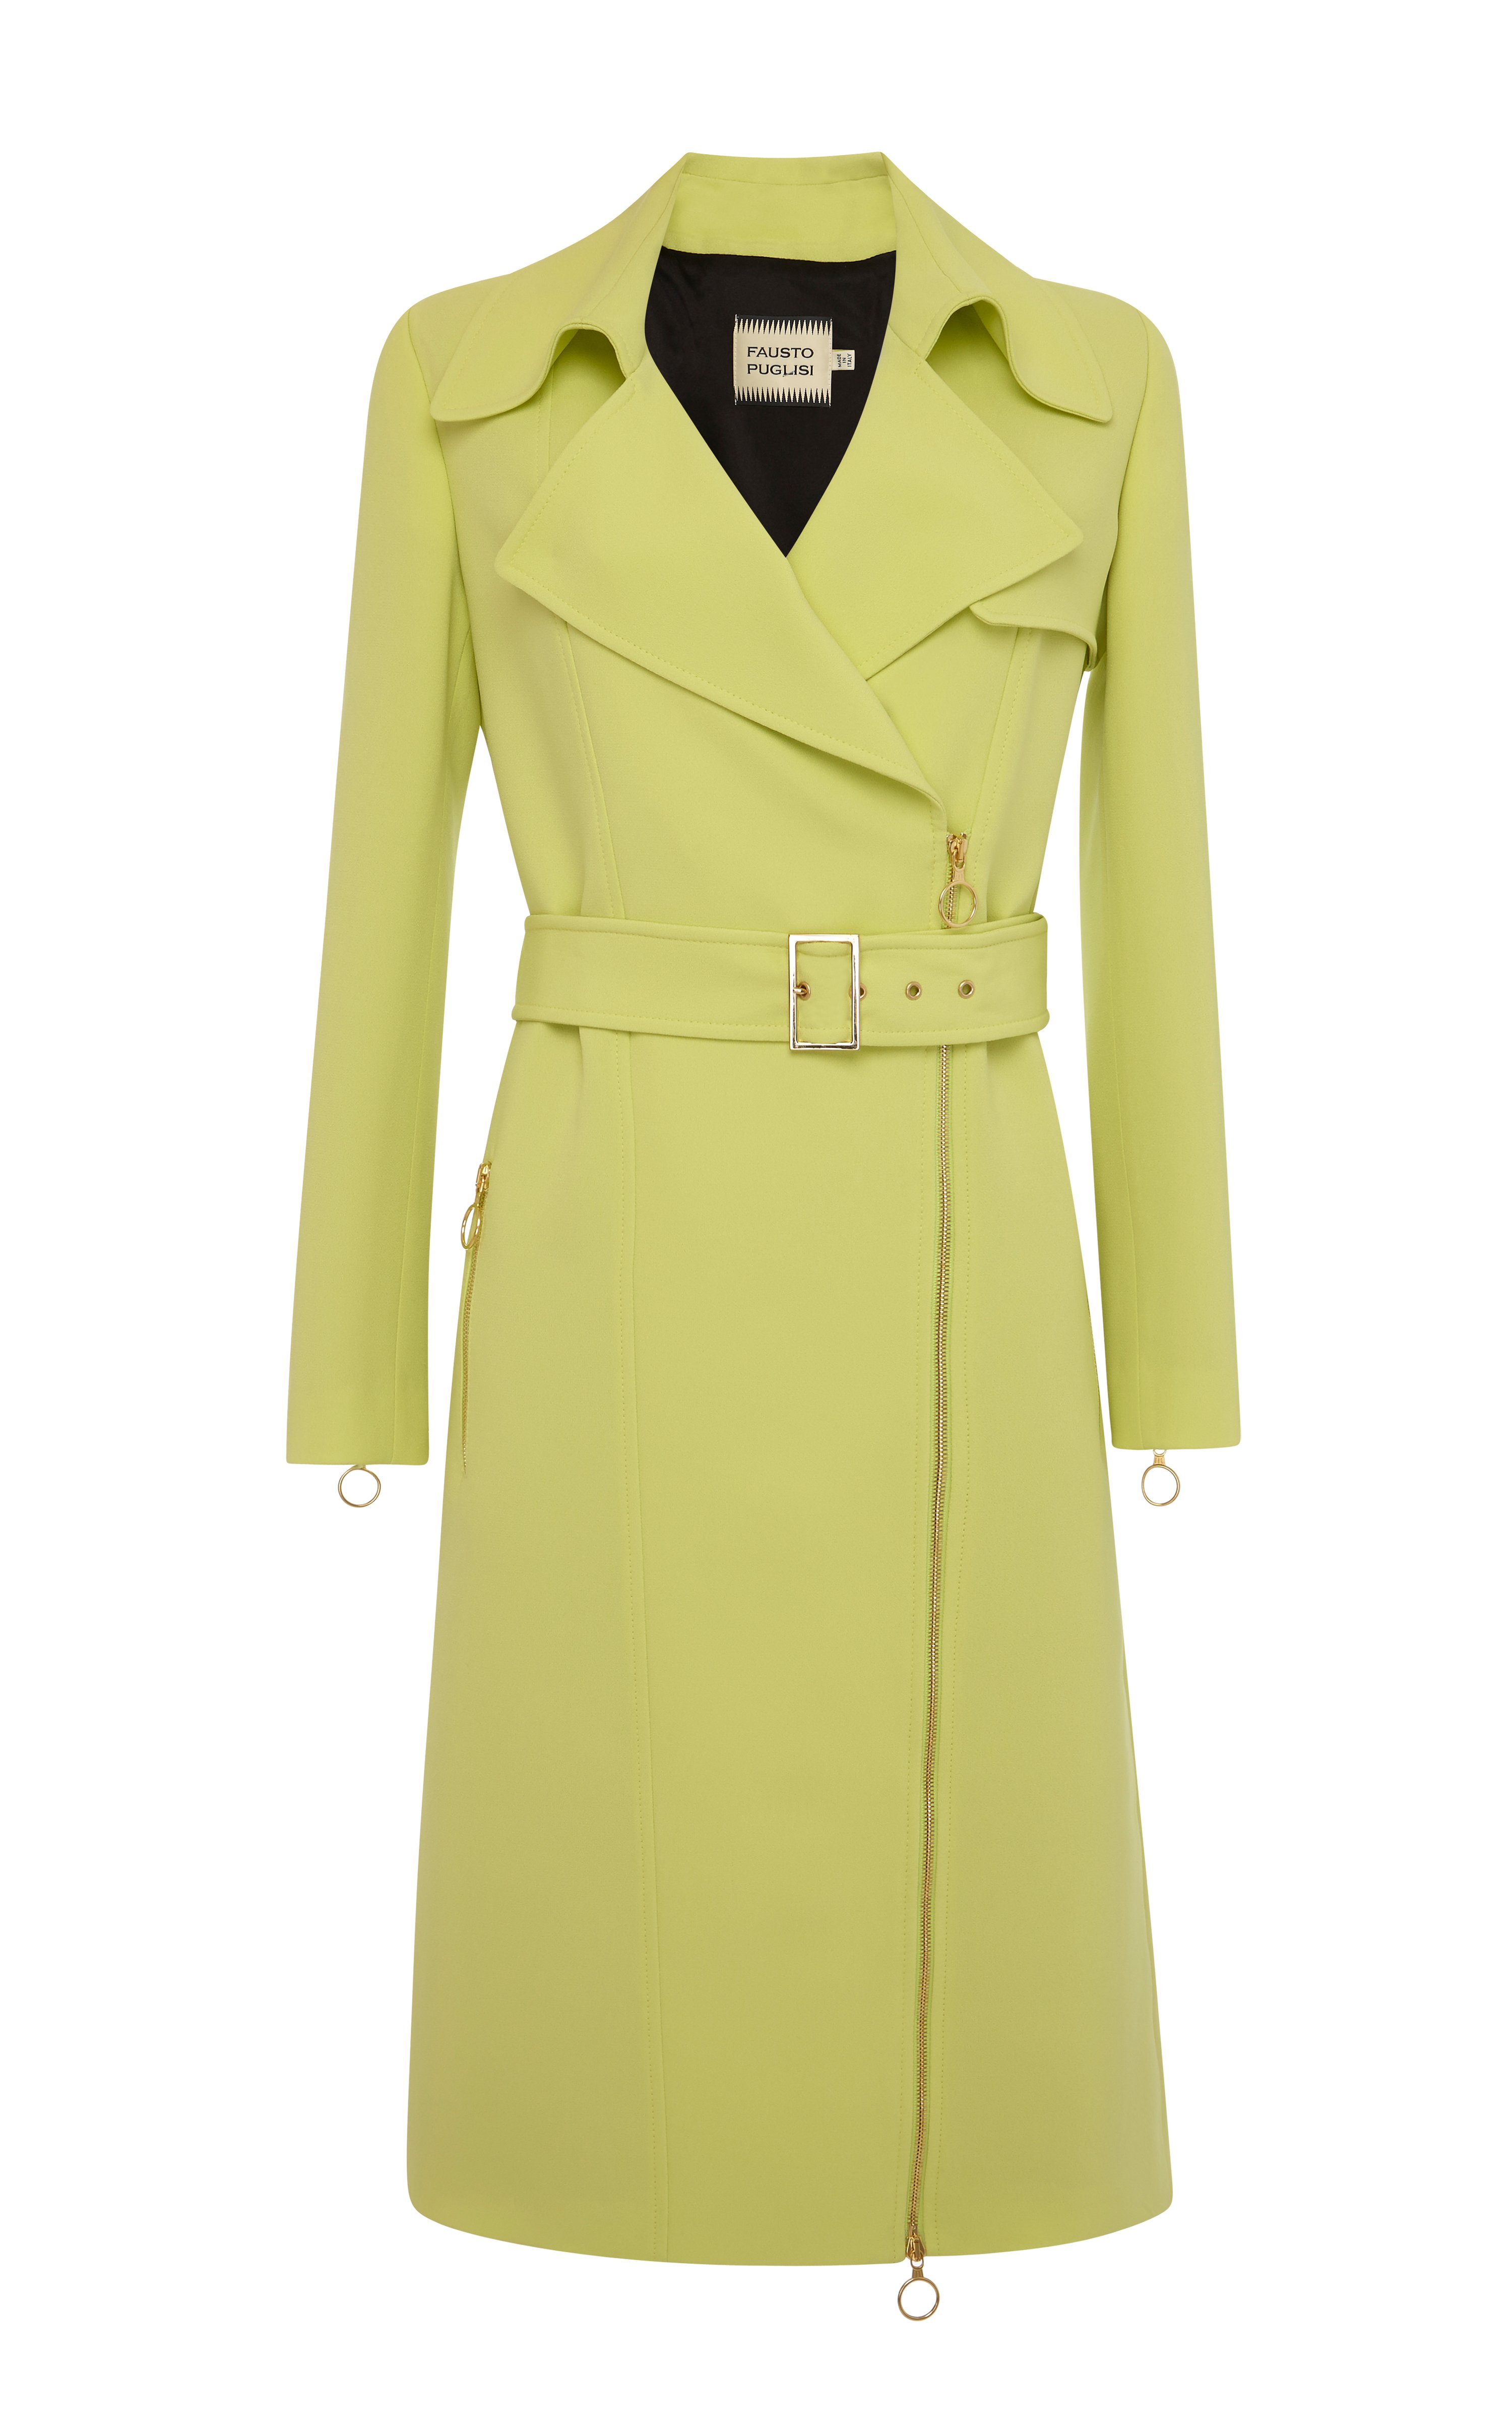 Lyst - Fausto Puglisi Lime Green Trench Coat in Green